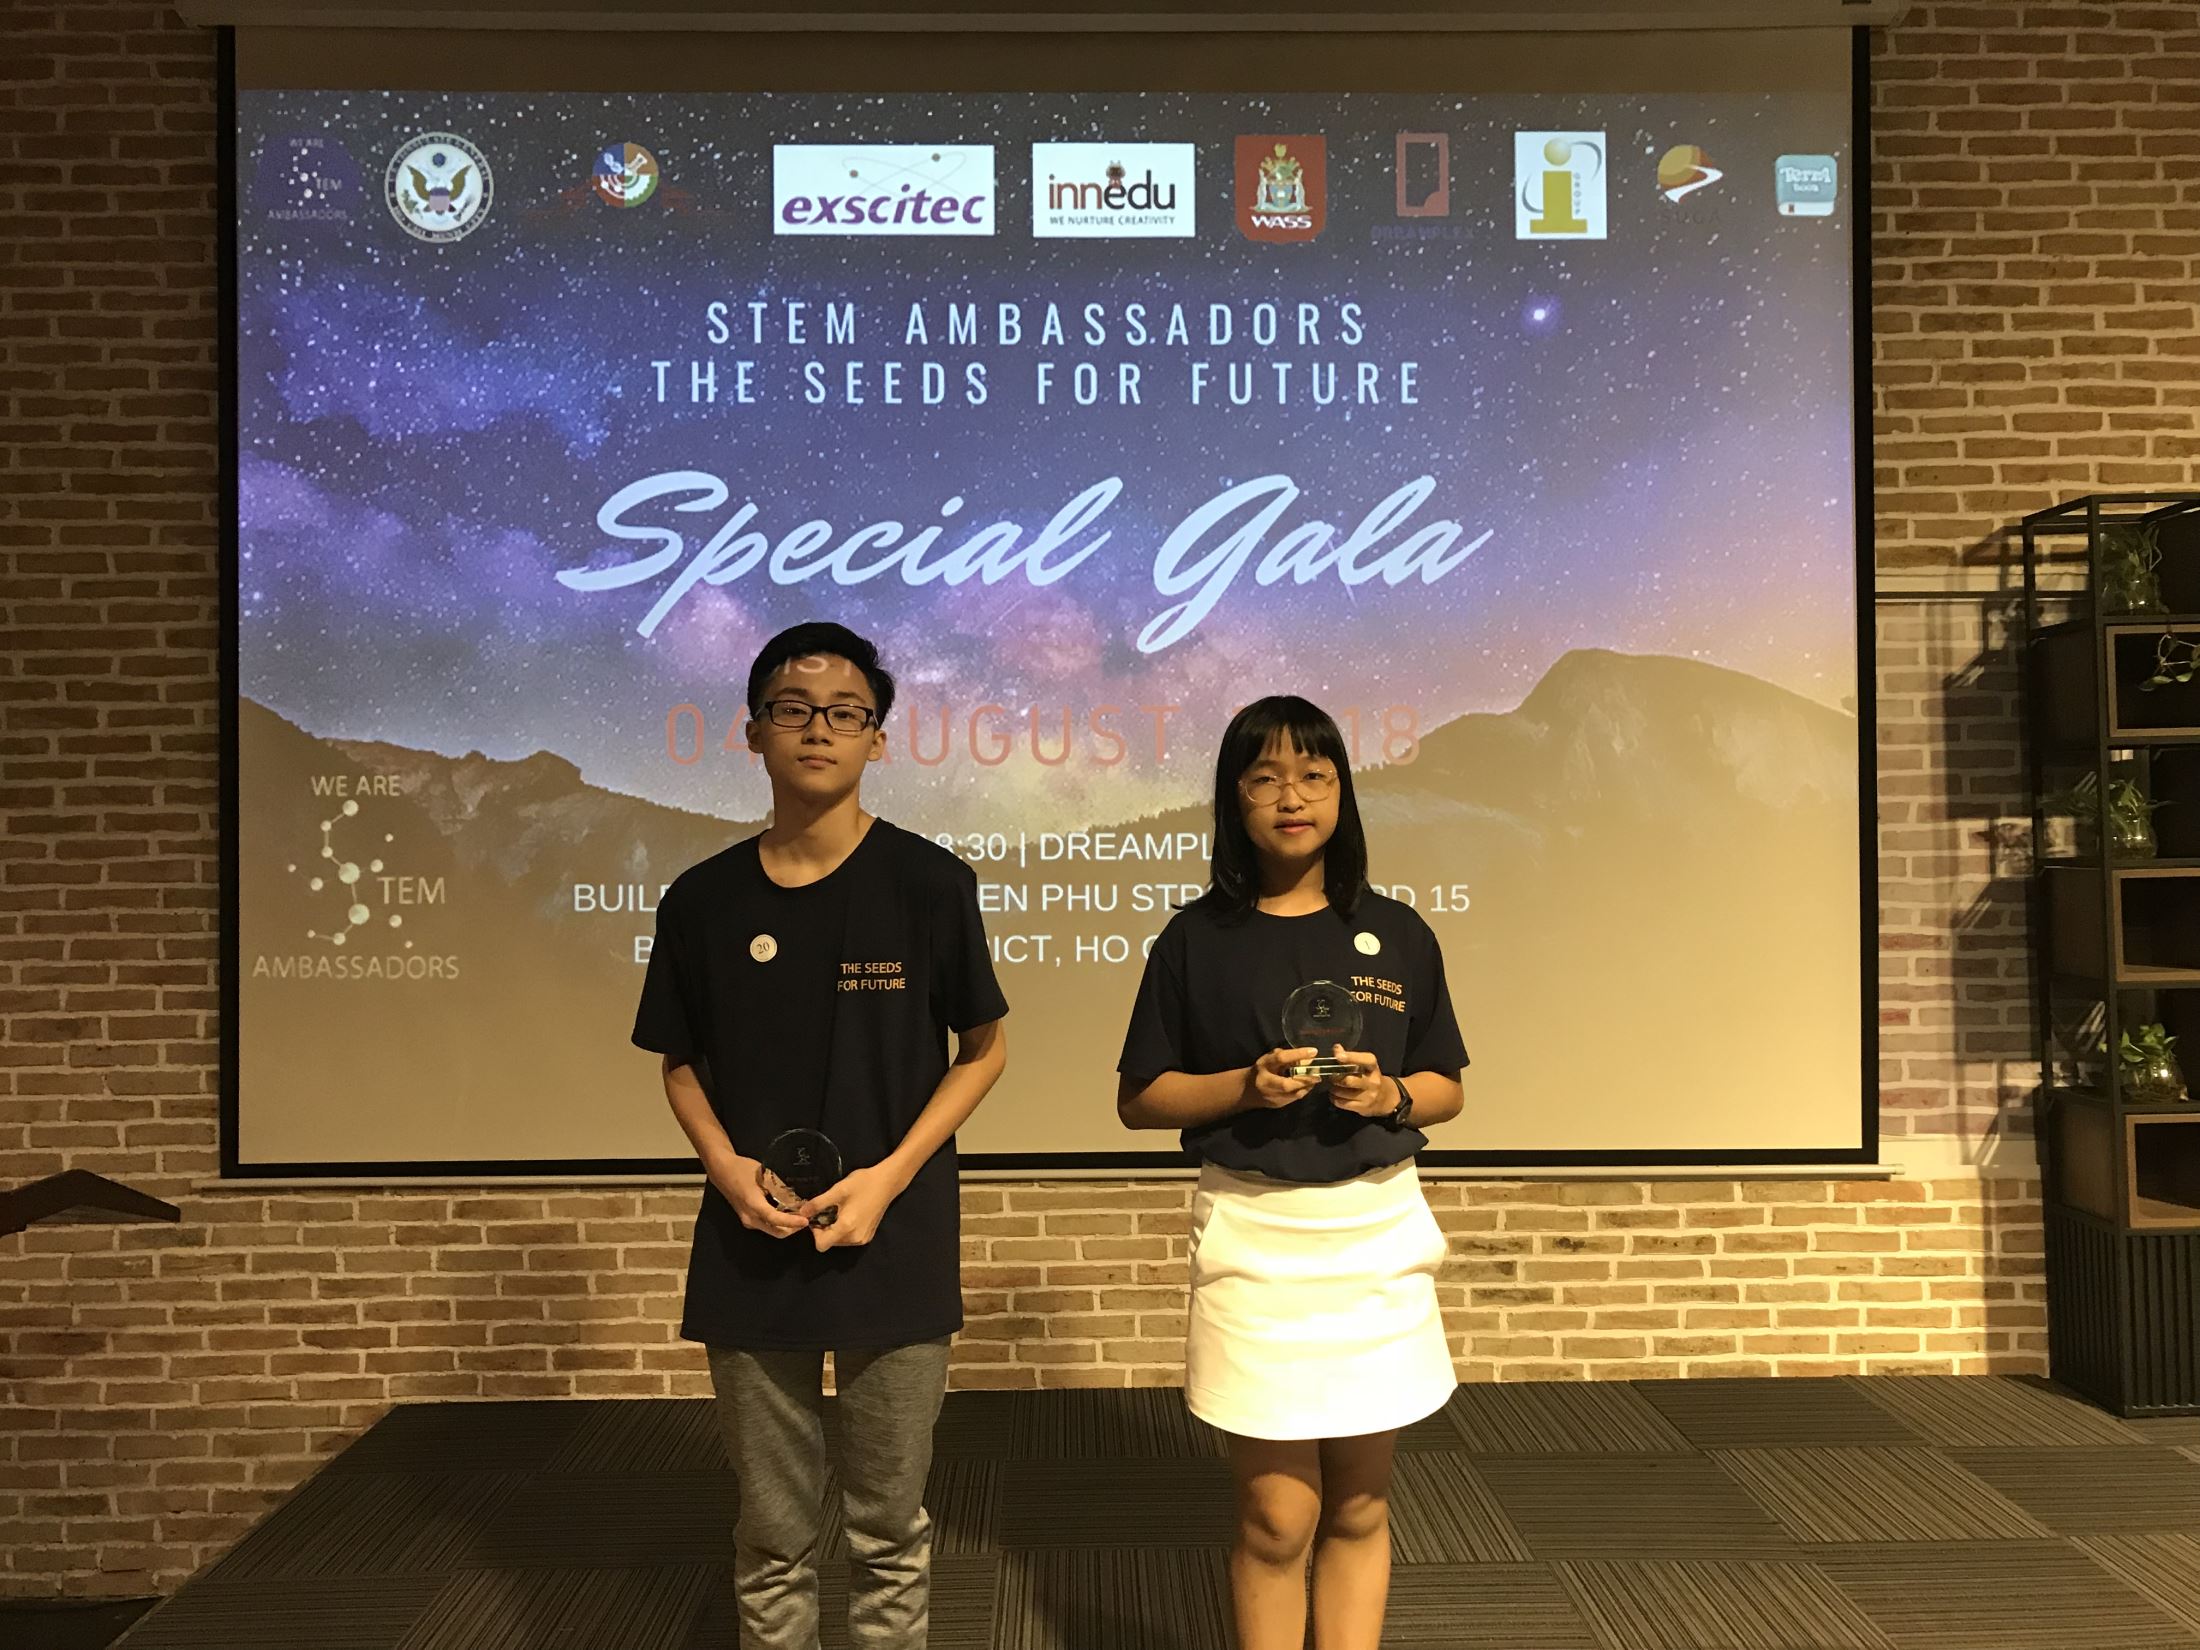 Tom Phi Trung Viet (left) and Anna Ngo Trinh Bao Nhi (right) represented for SNA to receive STEM Ambassadors trophy.